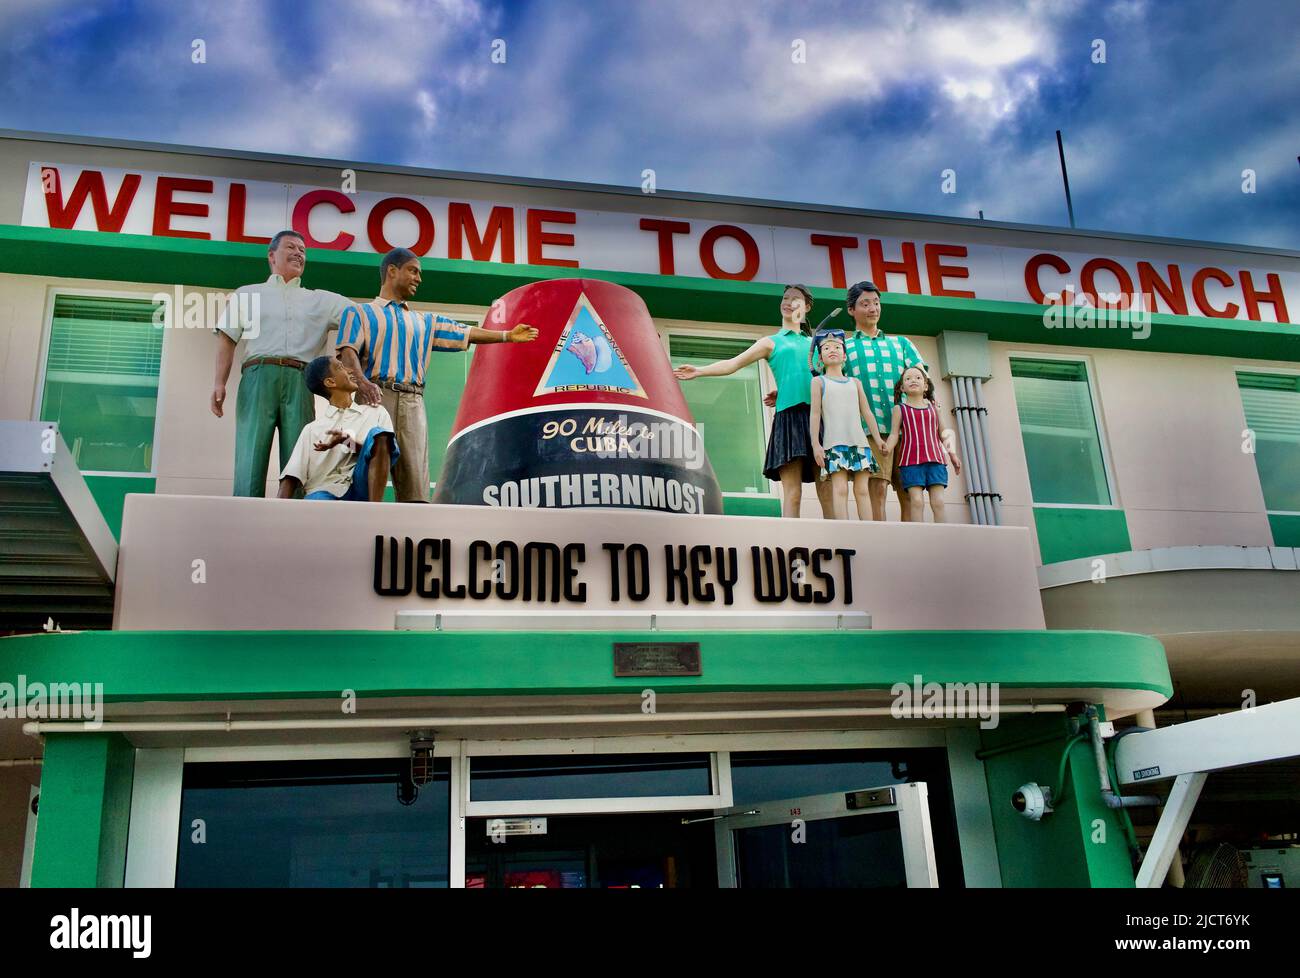 “Welcome to the Conch Republic” reads the sign on the Key West International Airport building as you enter from the tarmac.  Group of mannequins Stock Photo